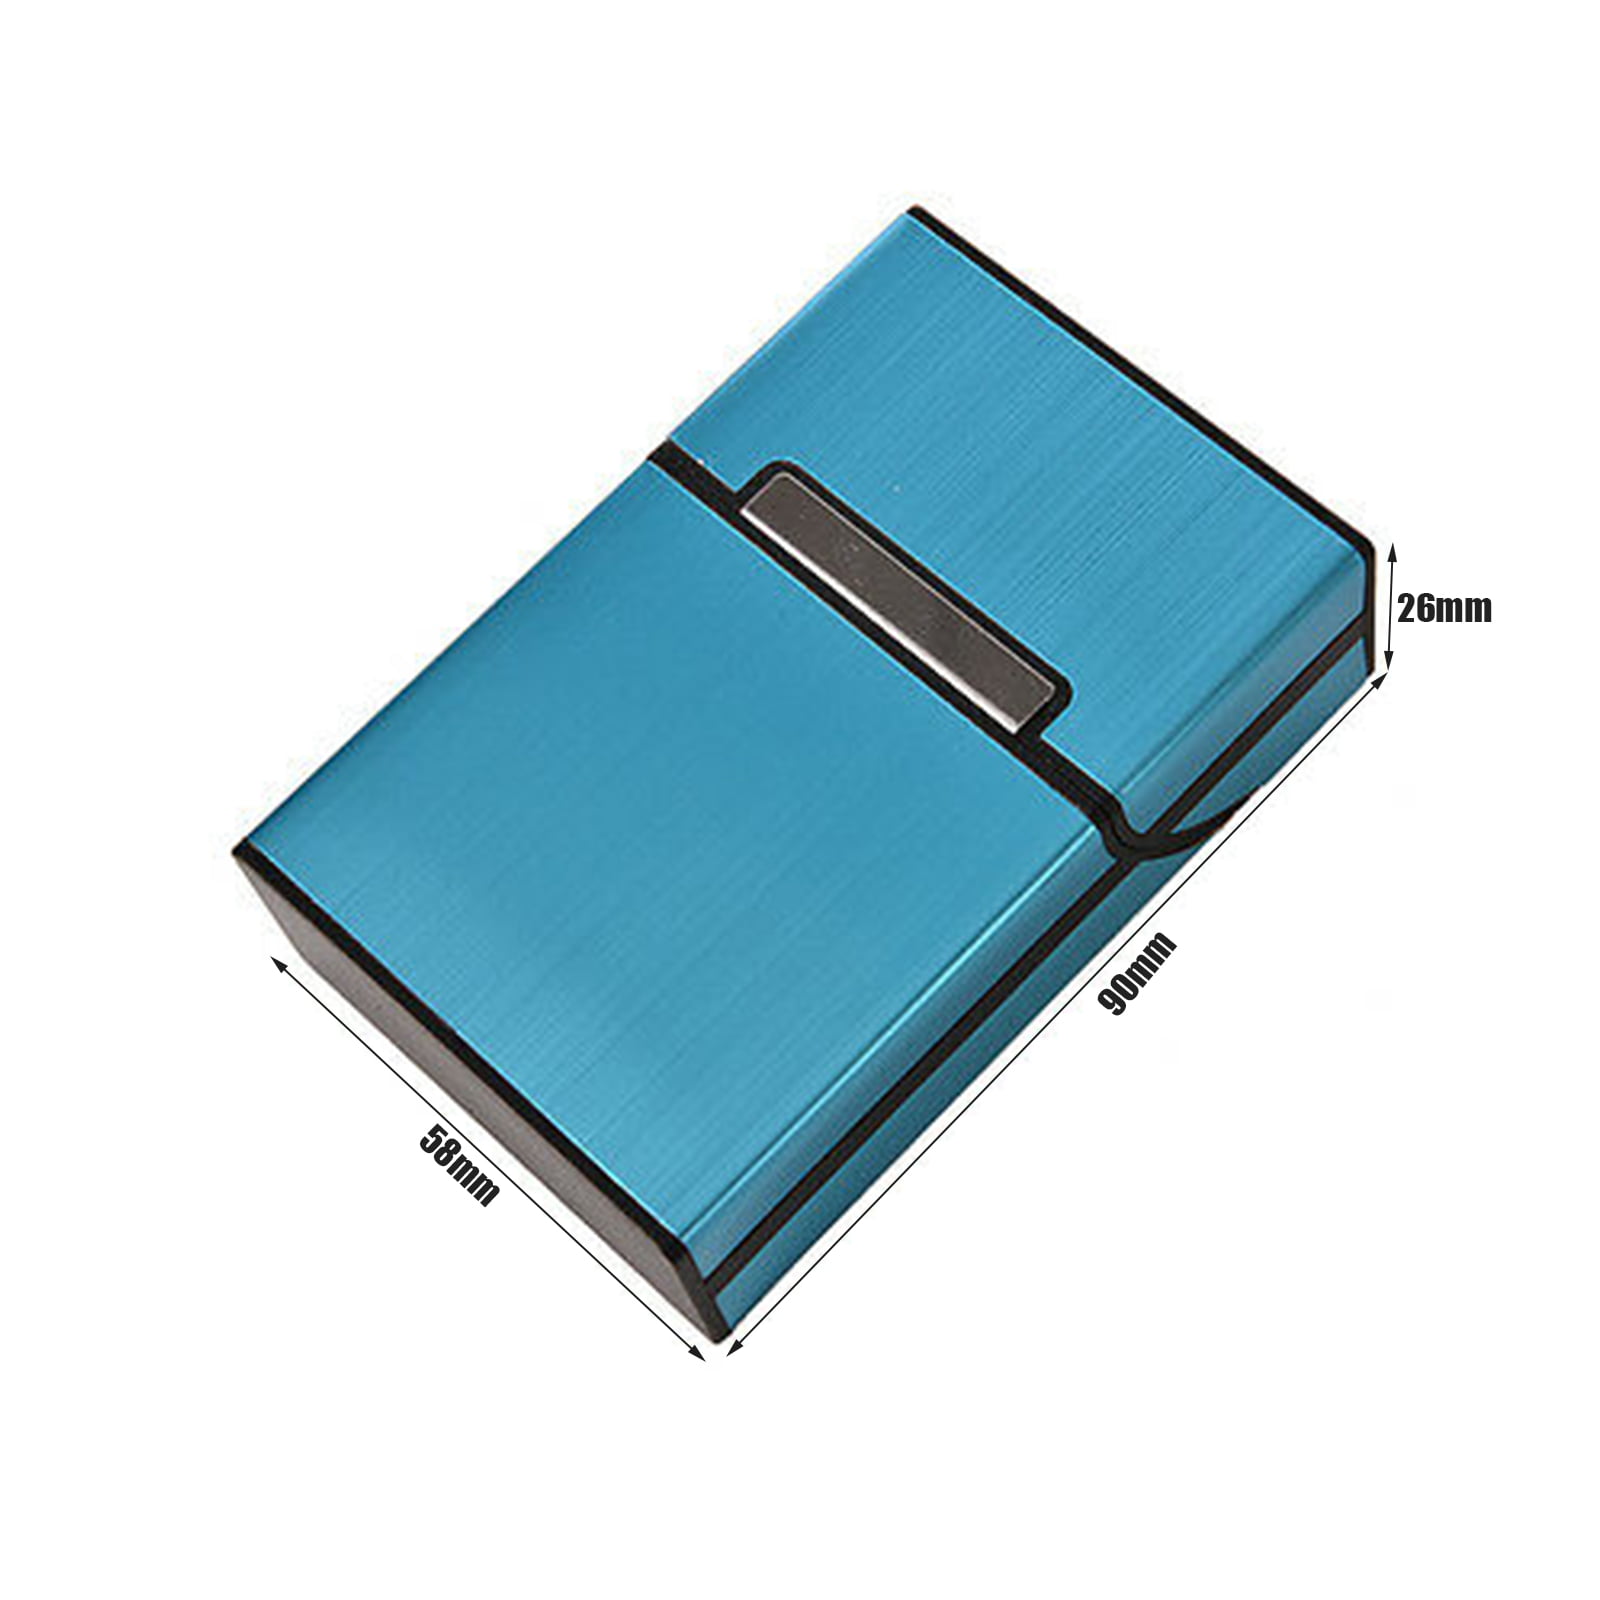 1pc 20-cigarette Capacity Business Aluminum Alloy Cigarette Case, Black  Square Magnetic Clasp Portable Exquisite Smoking Accessory Used For  Festivals, Birthdays, Corporate Gifts, Business Meetings